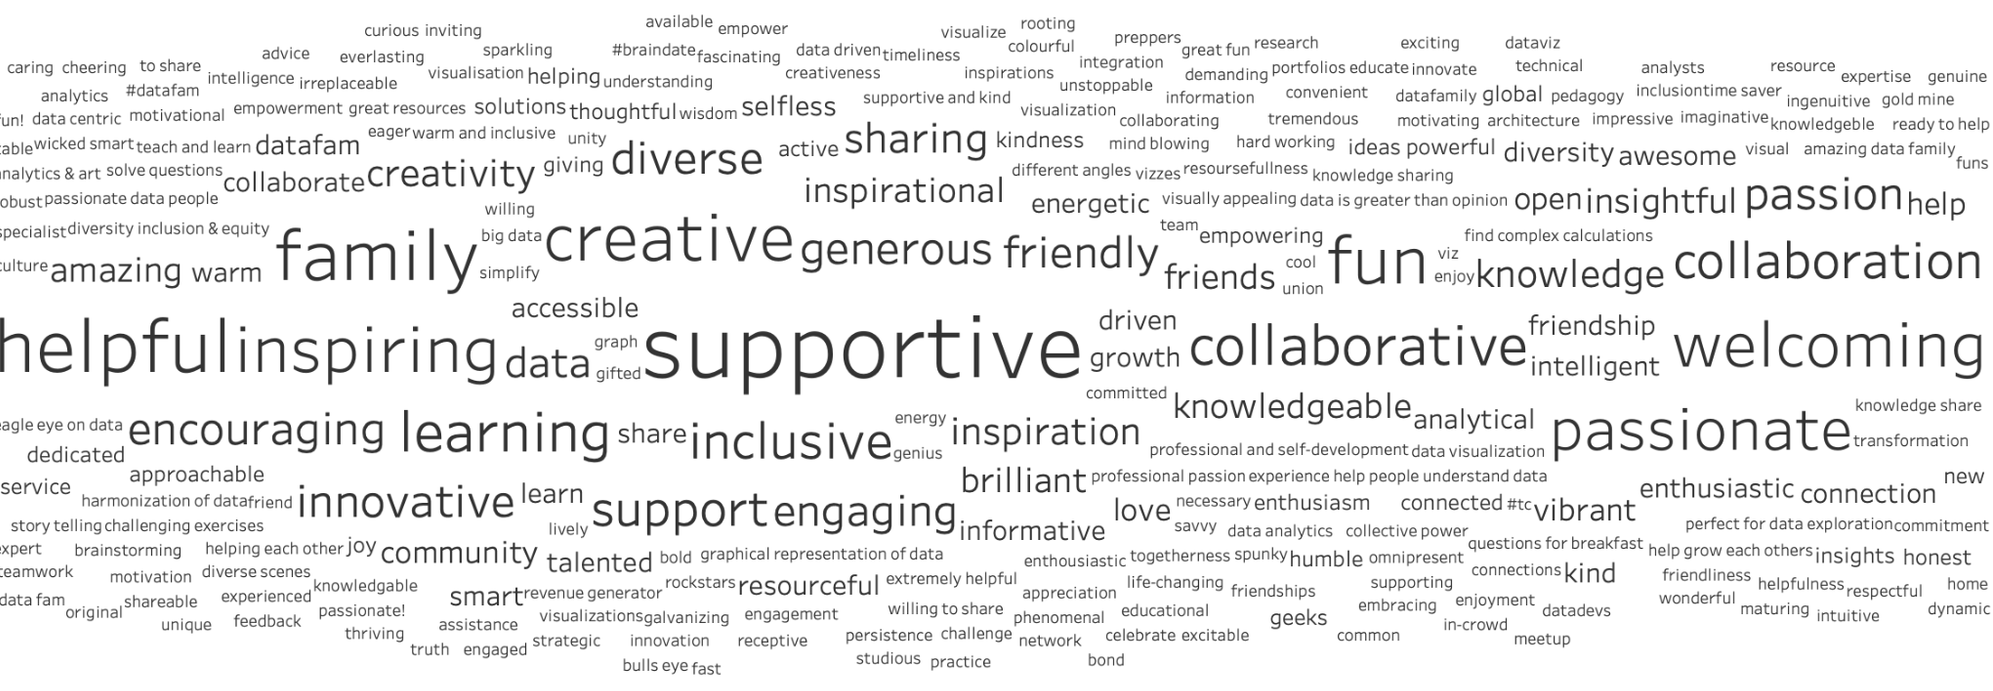 Word cloud titled “What three words come to mind when you think about the Tableau Community? 2021 Tableau Ambassadors, 712 words submitted.” Dominant words: supportive, creative, inspiring, learning, welcoming, helpful, family